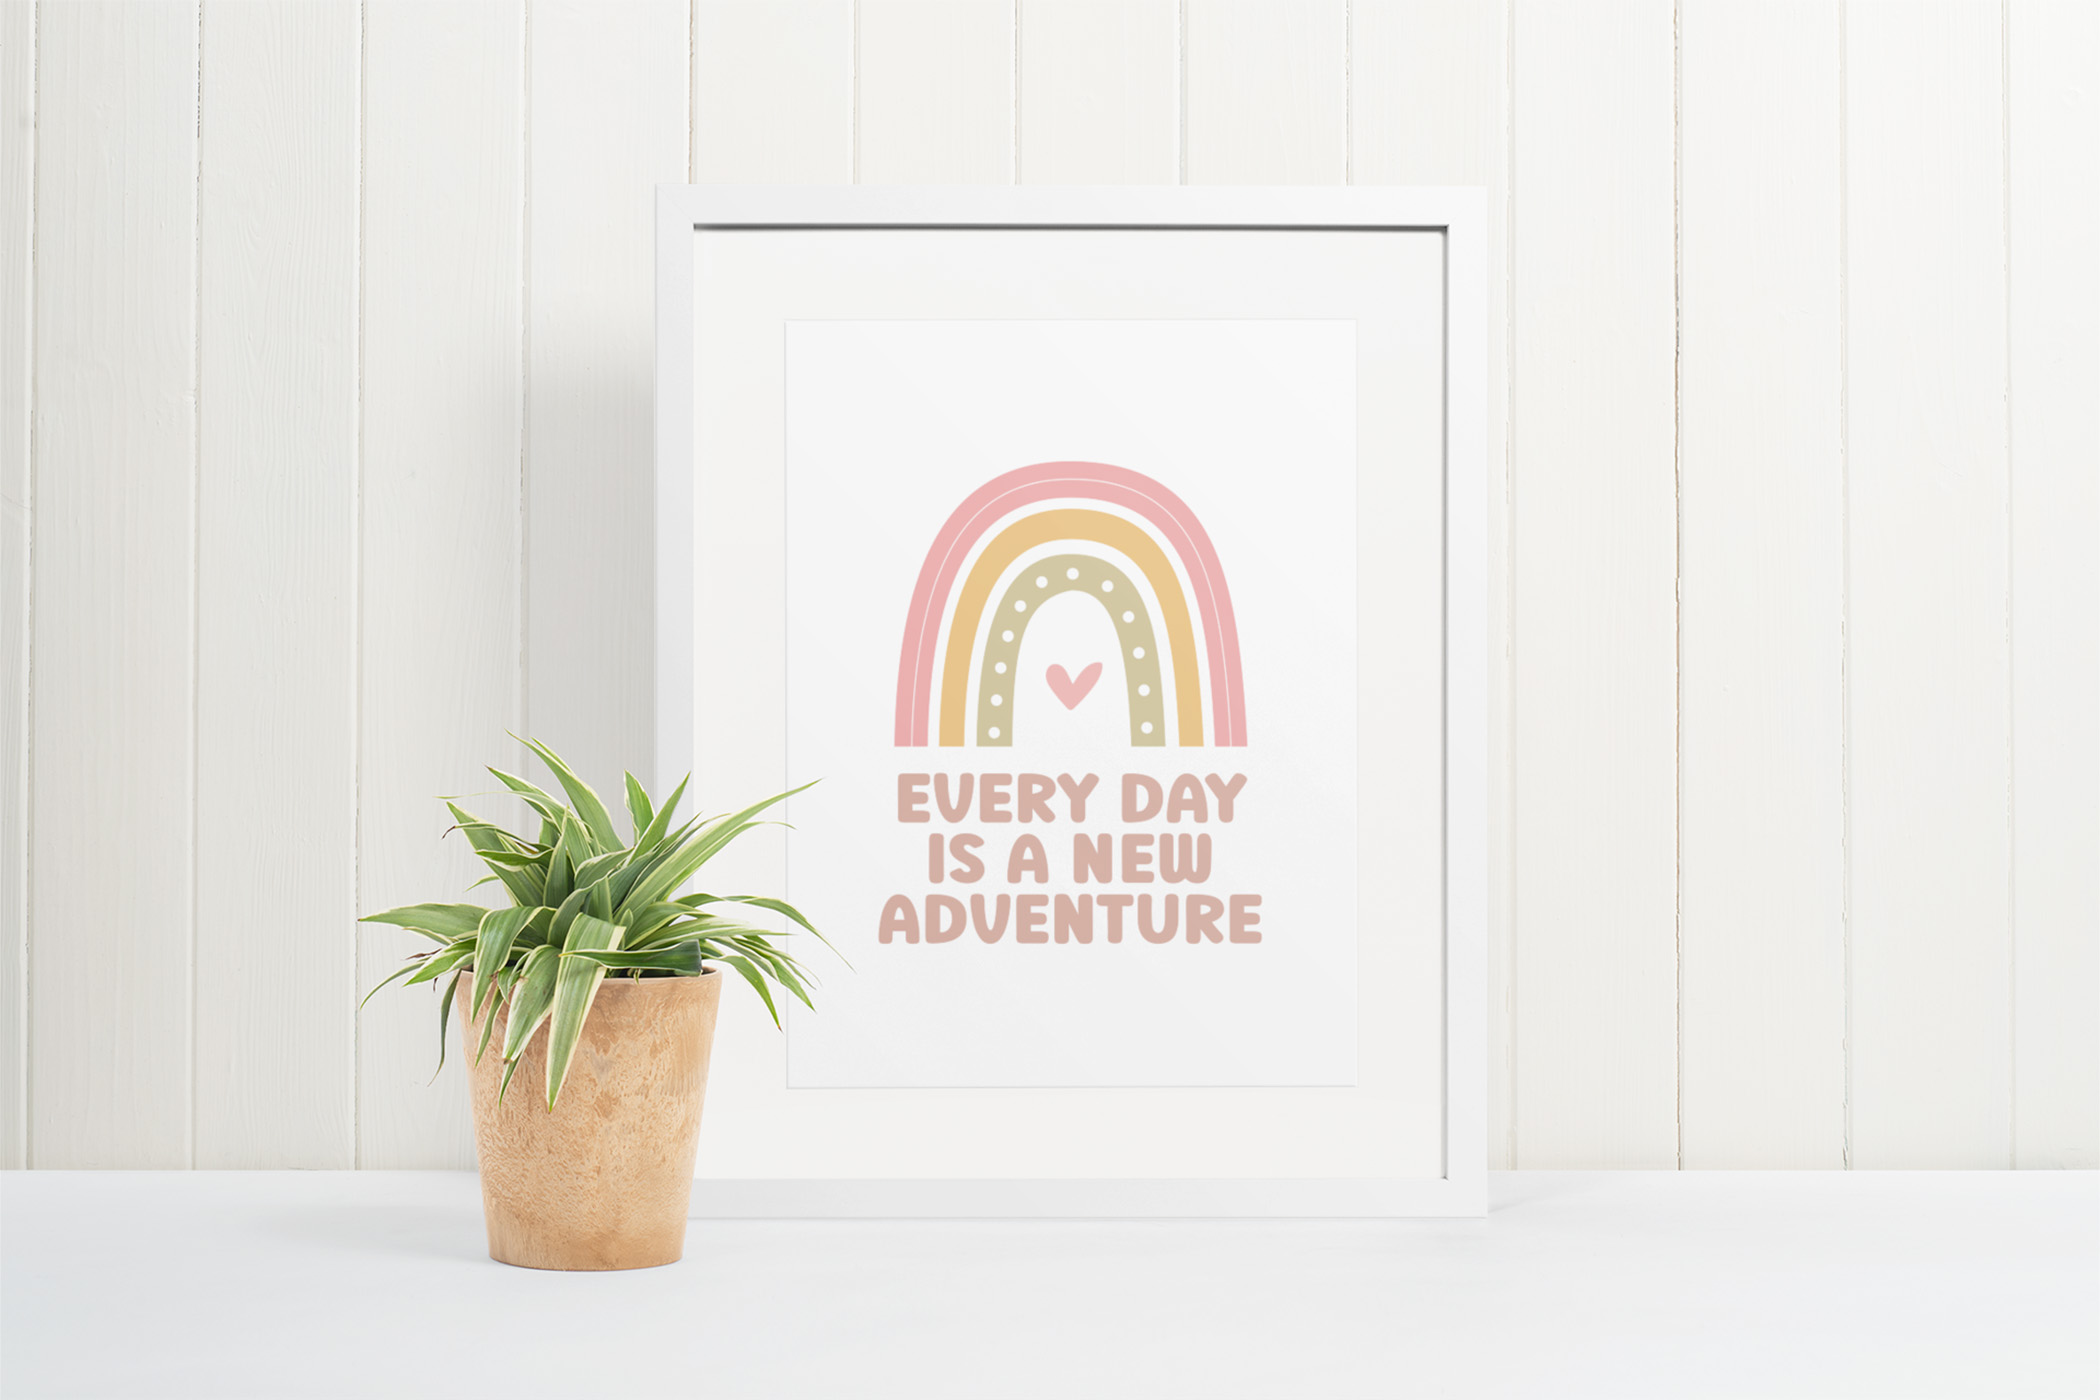 Love from J Every Day is a new adventure digital print in white frame